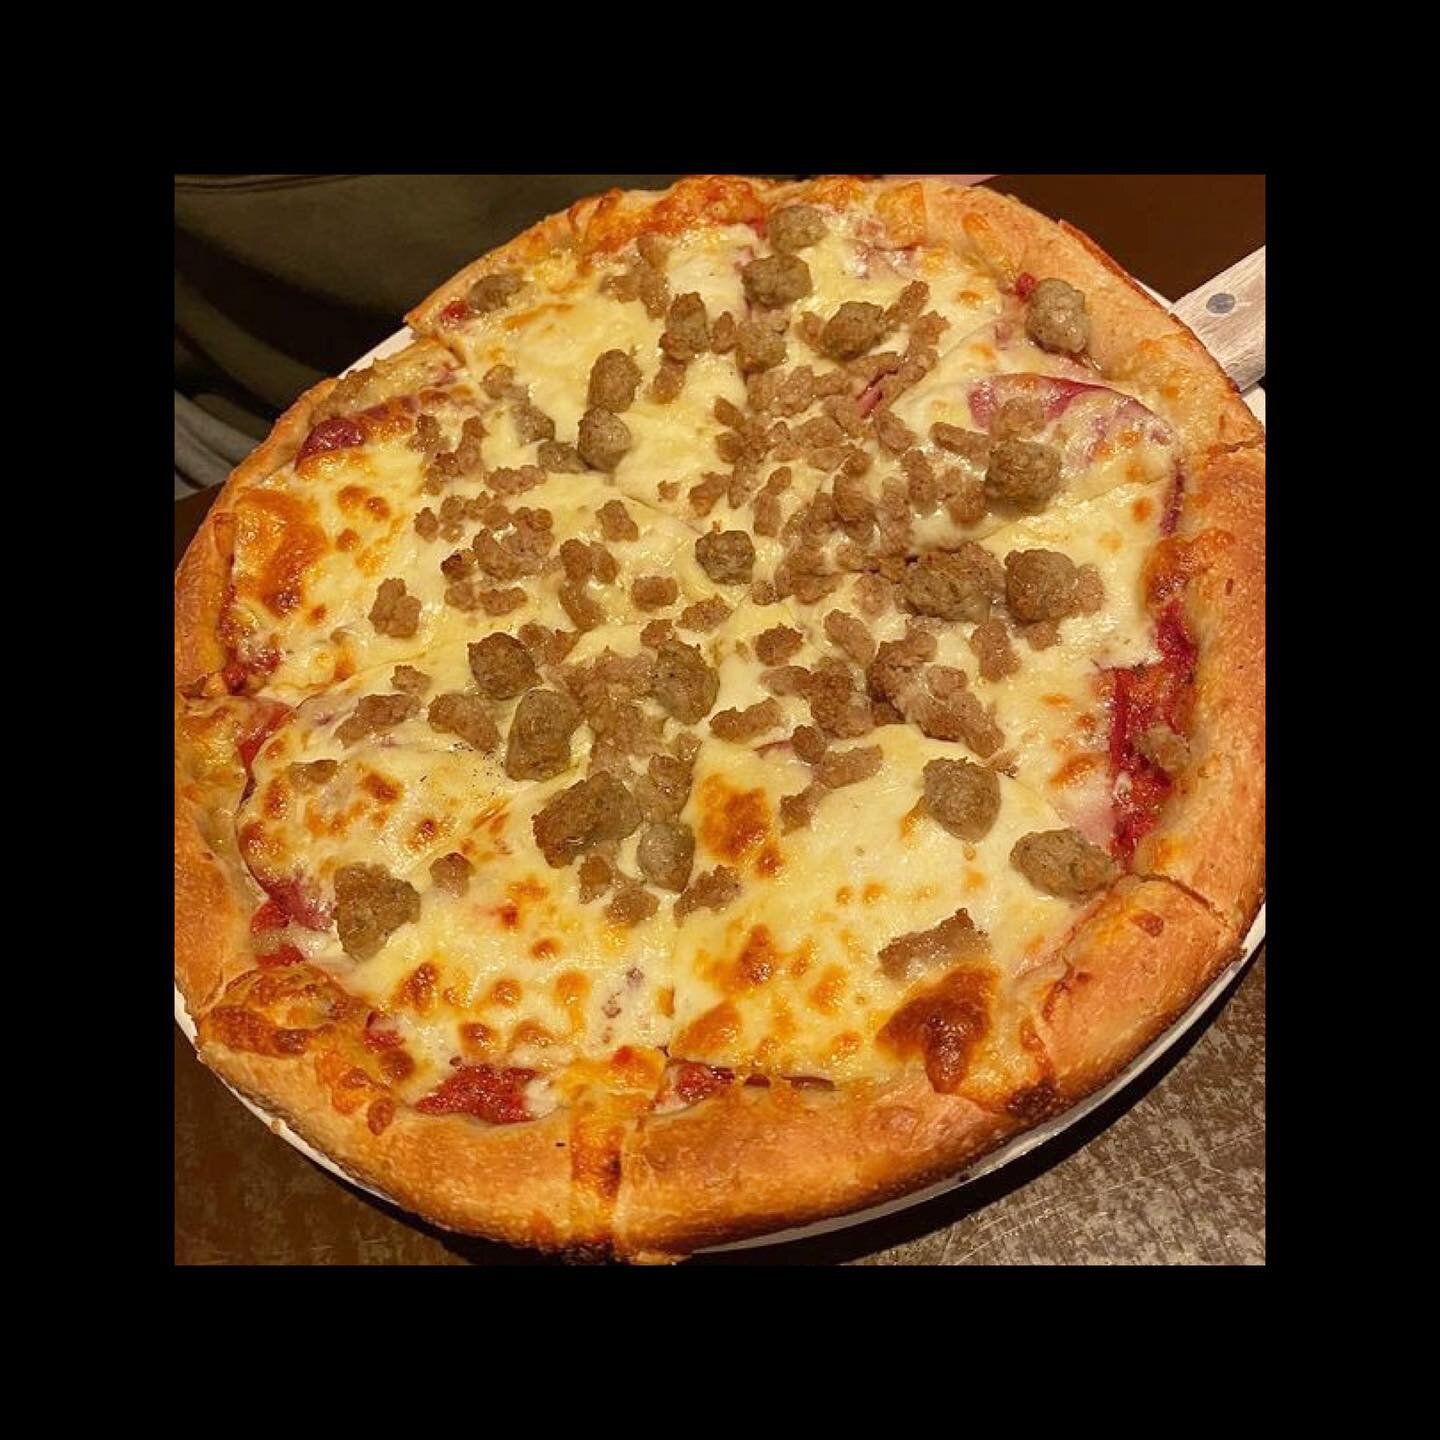 FRIDAY = PIZZA PARTY! ❤️🎉🍕
It&rsquo;s been a long week! Time for a Gino&rsquo;s pizza to kick off the weekend! 
What toppings are you having?! 

OPEN DAILY FOR 
DINE-IN/TAKEOUT/DELIVERY
 📞 604-525-1071 
431 E. Columbia, New Westminster 

Photo cre